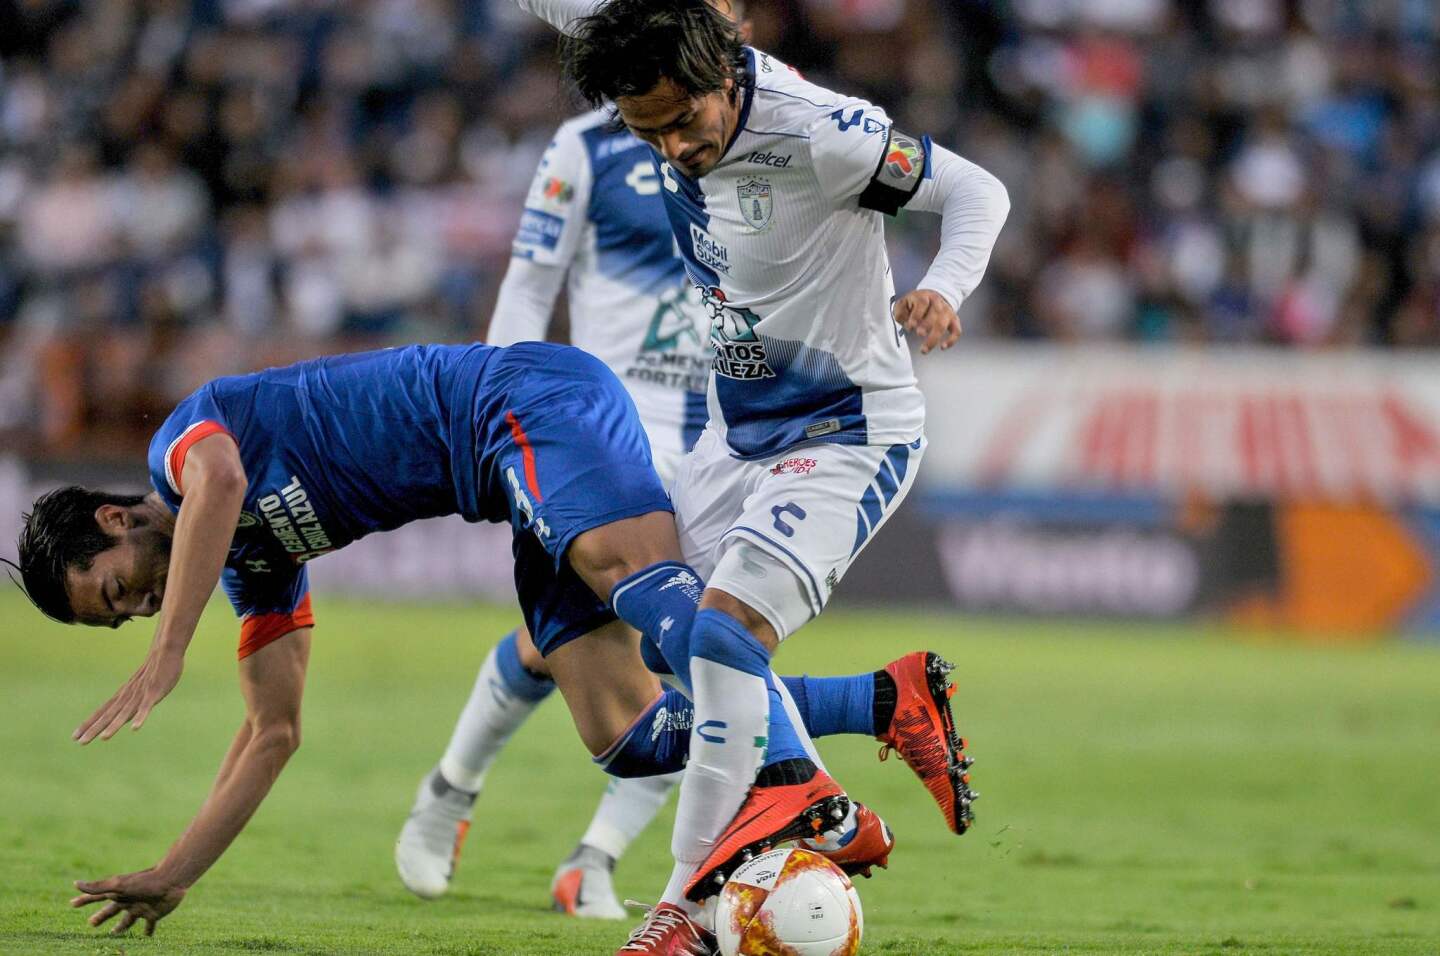 Jorge Hernandez (R) of Pachuca vies for the ball with Javier Salas (L) of Cruz Azul during the Mexican Apertura 2018 tournament football match at the Hidalgo stadium in Pachuca, Mexico on September 29, 2018. (Photo by ROCIO VAZQUEZ / AFP)ROCIO VAZQUEZ/AFP/Getty Images ** OUTS - ELSENT, FPG, CM - OUTS * NM, PH, VA if sourced by CT, LA or MoD **